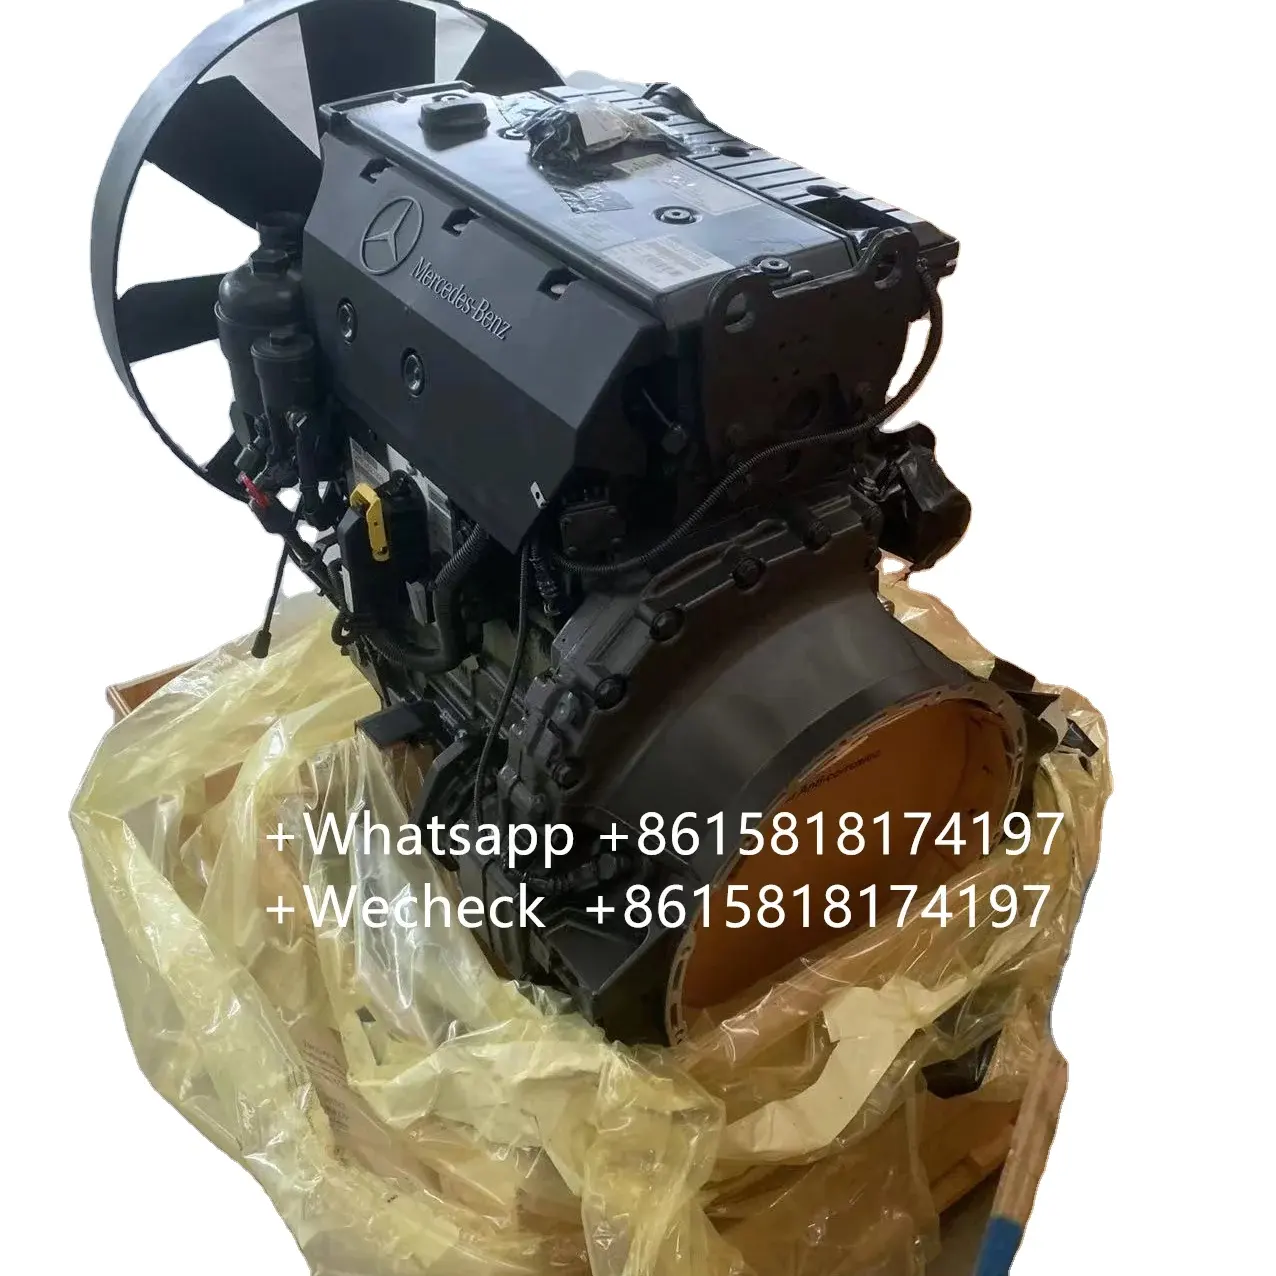 OM906LAE3A/1 Diesel engine G30838L0720E3A Rated power: 205 kW